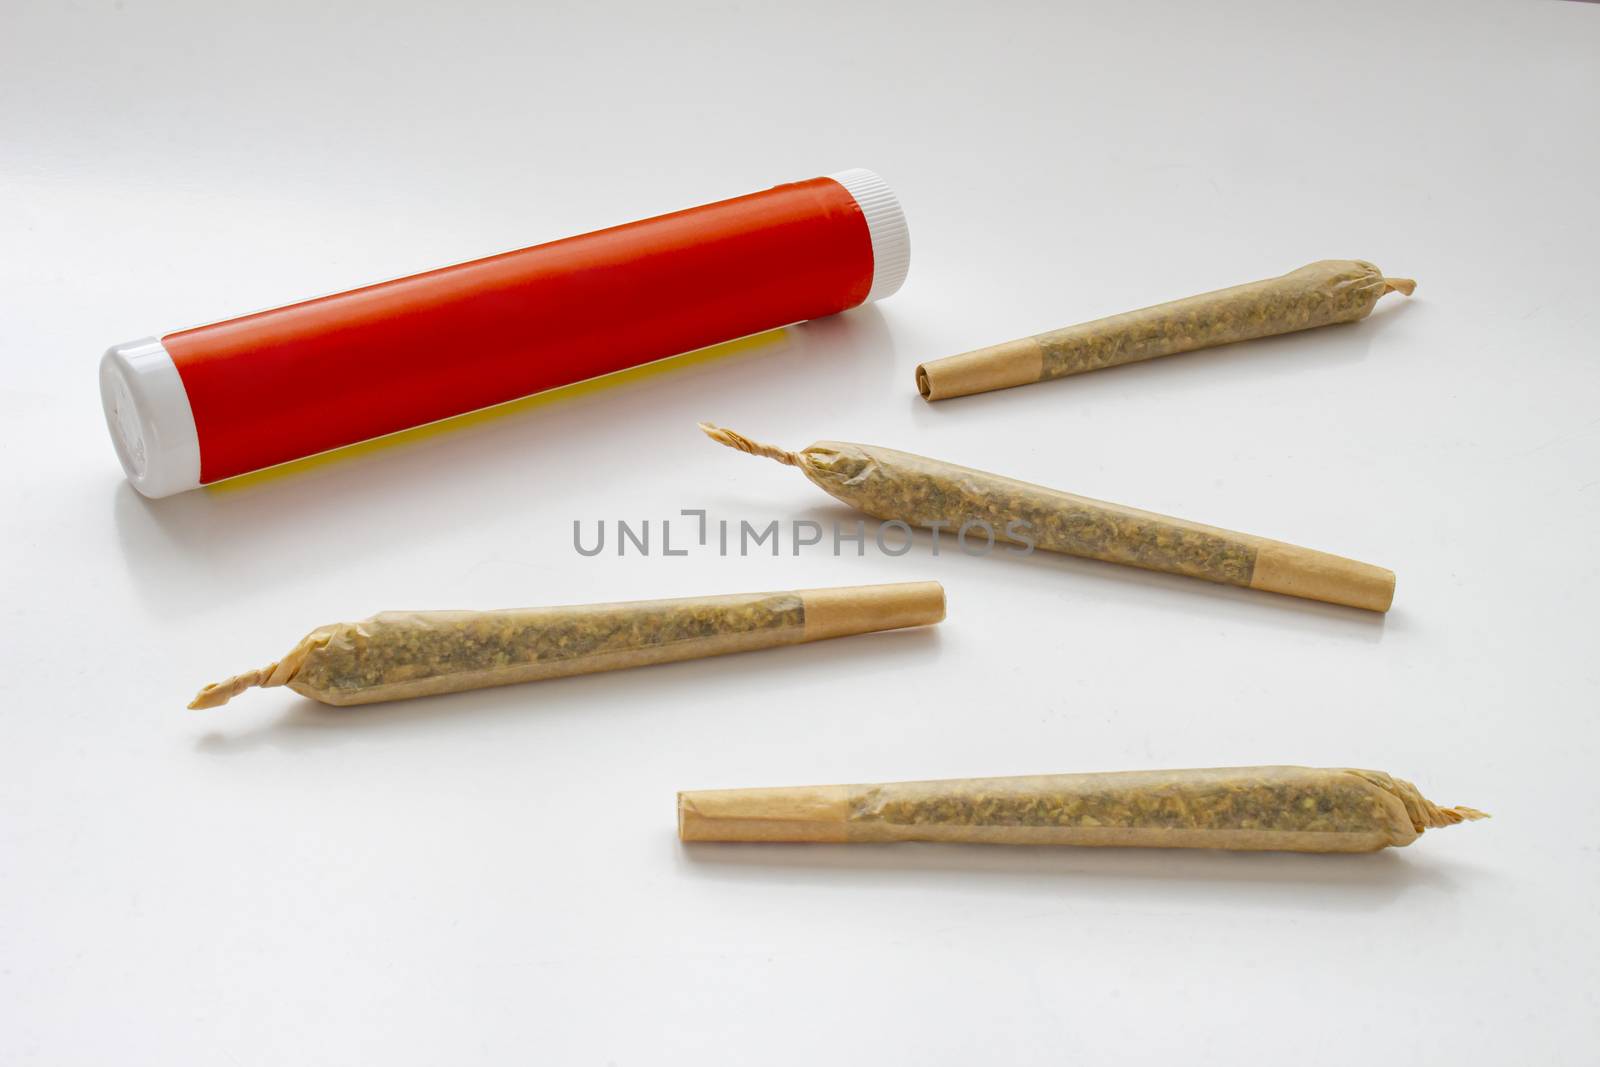 A Cannabis white and red plastic packaging container for Prerolls or Joints with pre-rolls cannabis joints around and a on a white background by oasisamuel